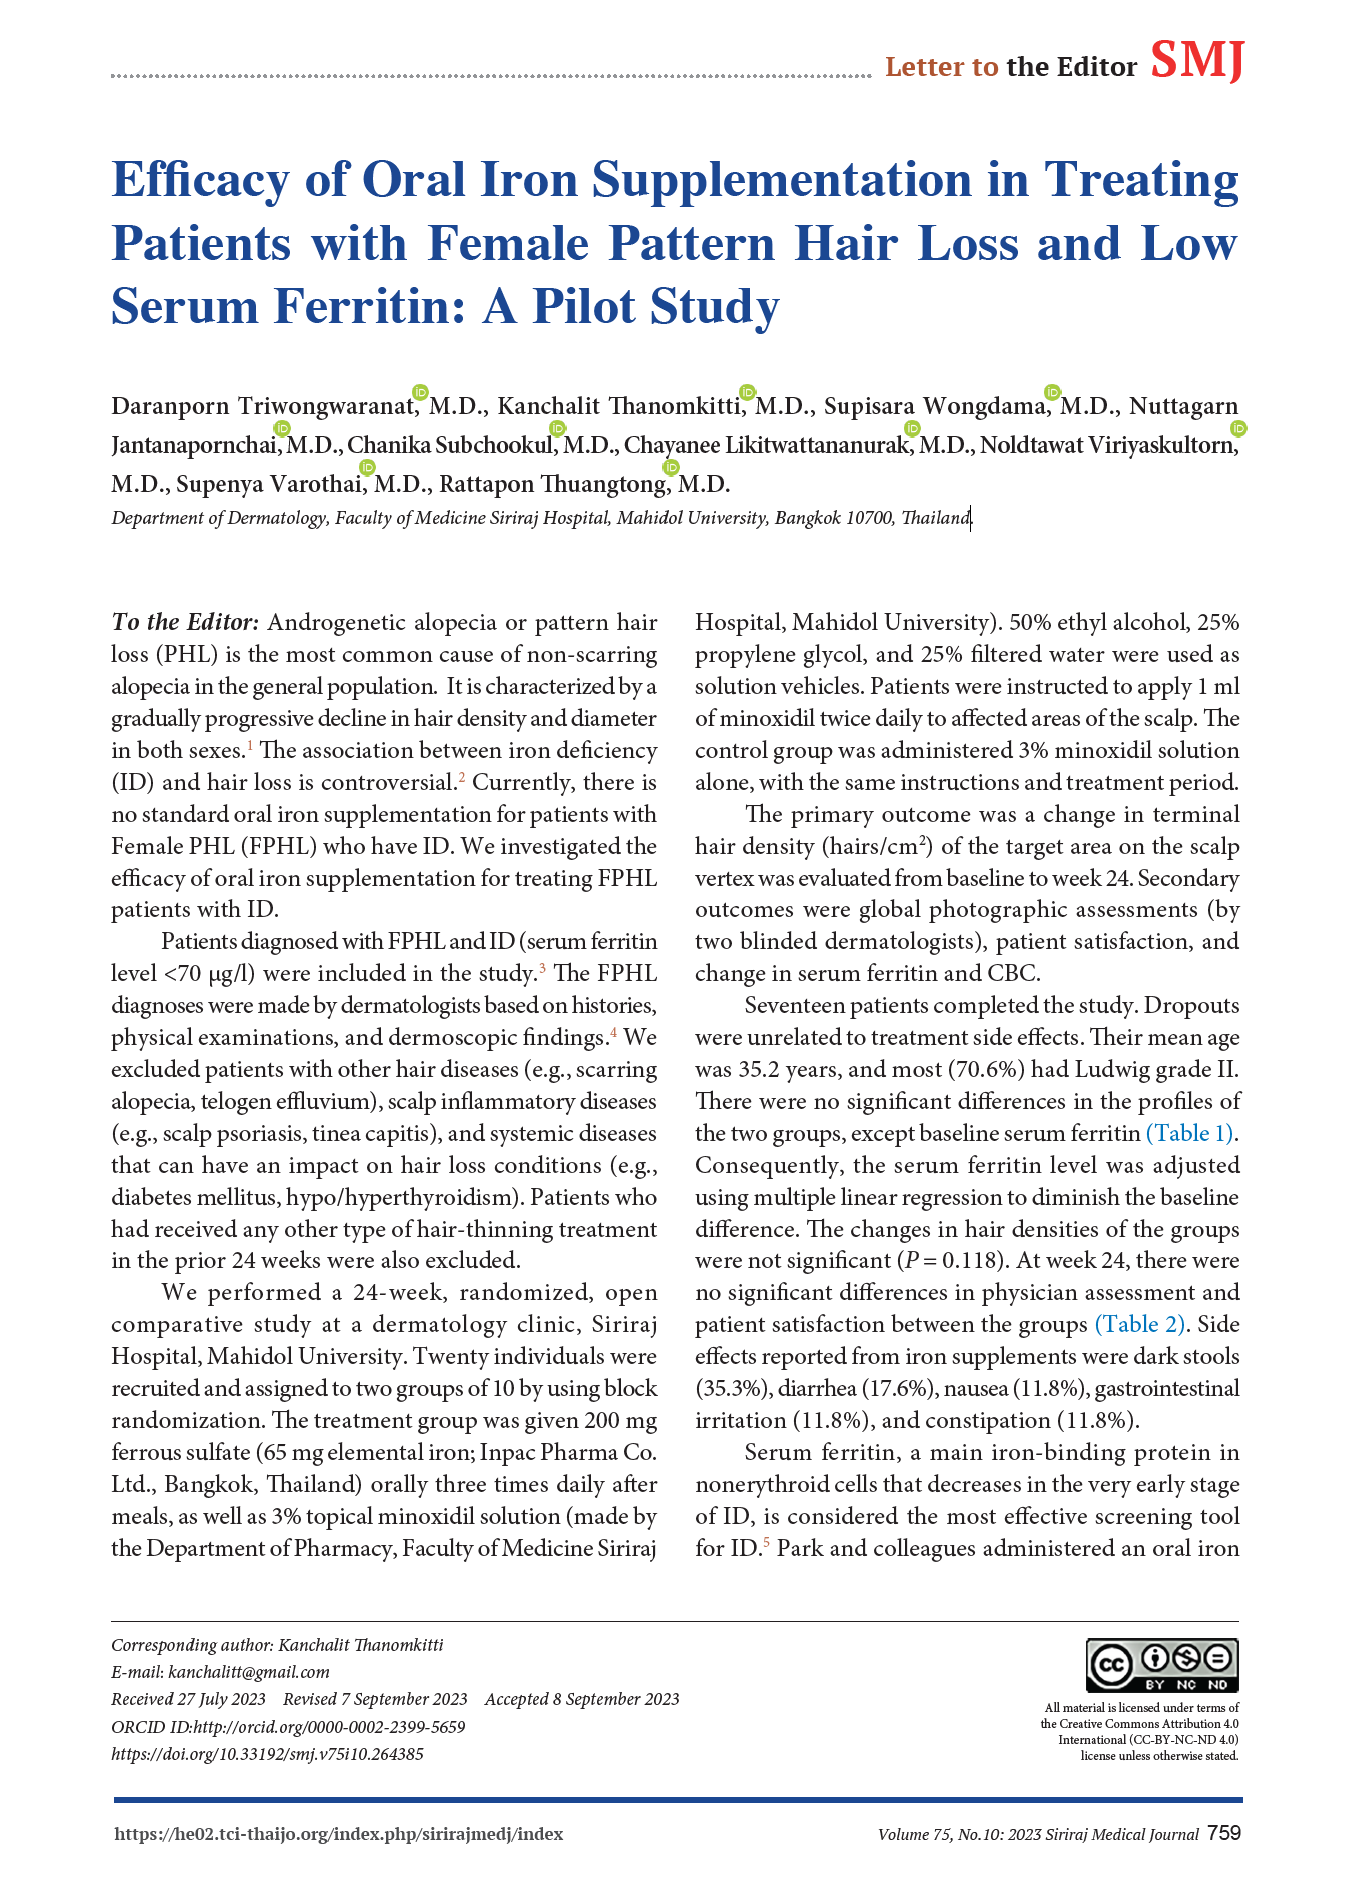 Efficacy of Oral Iron Supplementation in Treating Patients with Female Pattern Hair Loss and Low Serum Ferritin